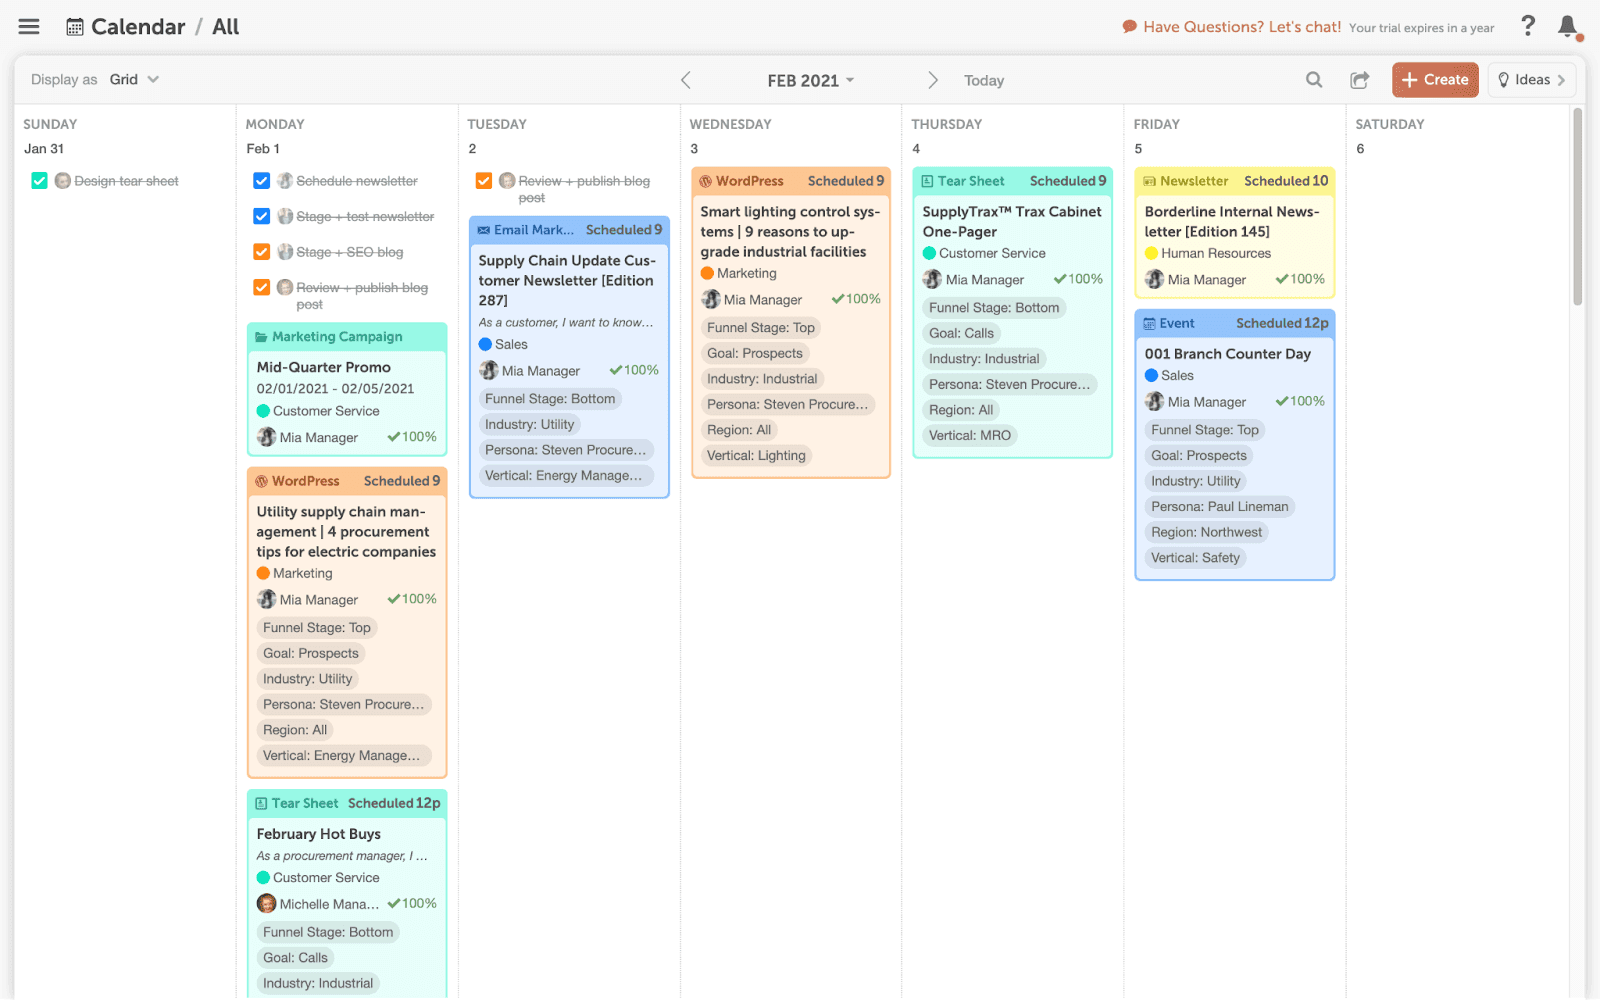 Example of what CoSchedule's marketing calendar looks like